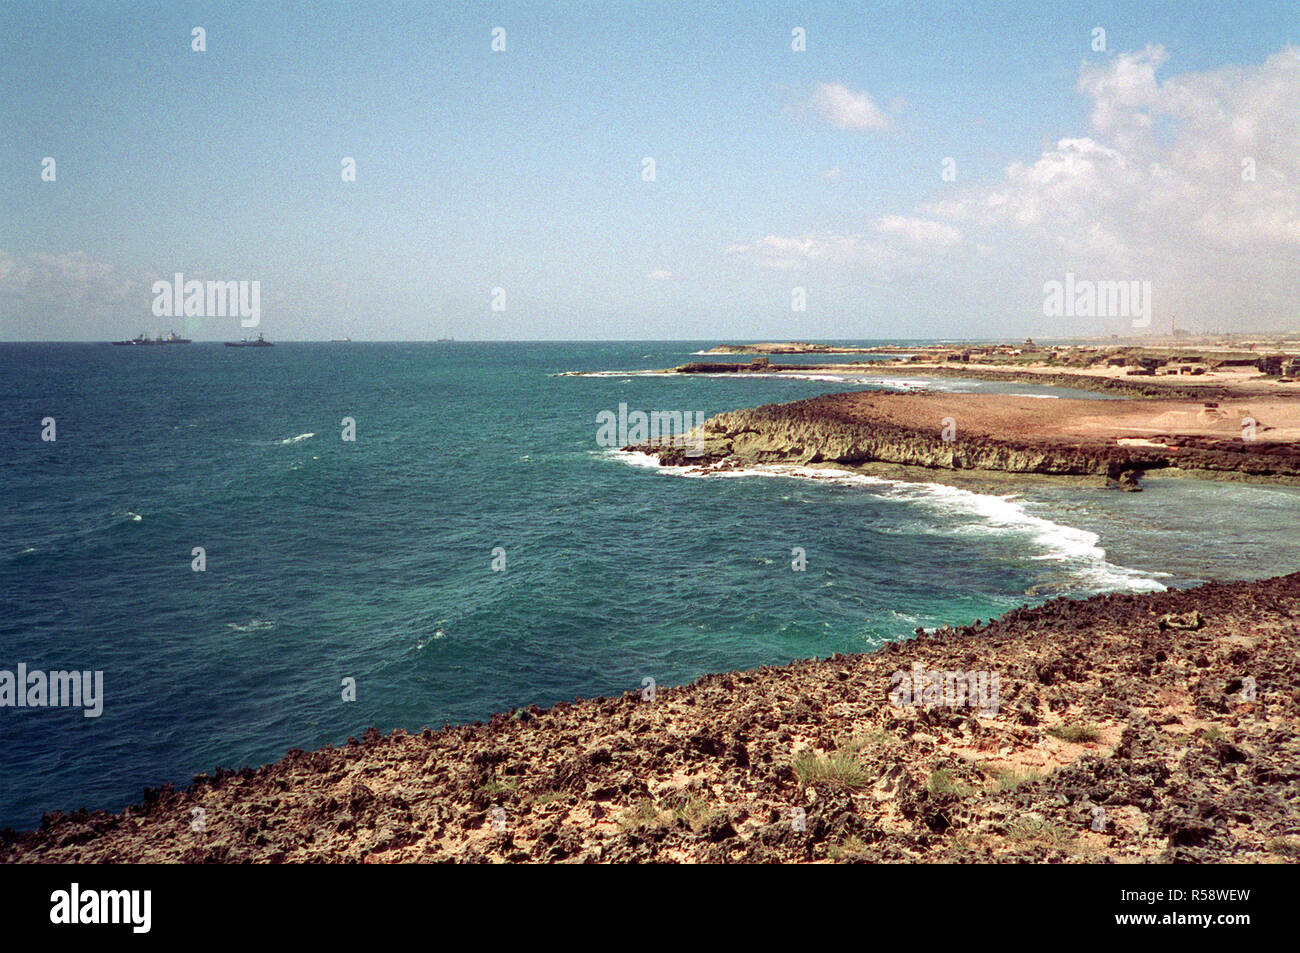 1993 - A view of the coastline near a base camp of Naval Mobile Construction Battalion (NMCB-1).  The unit in the region during Operation Restore Hope relief efforts. Stock Photo